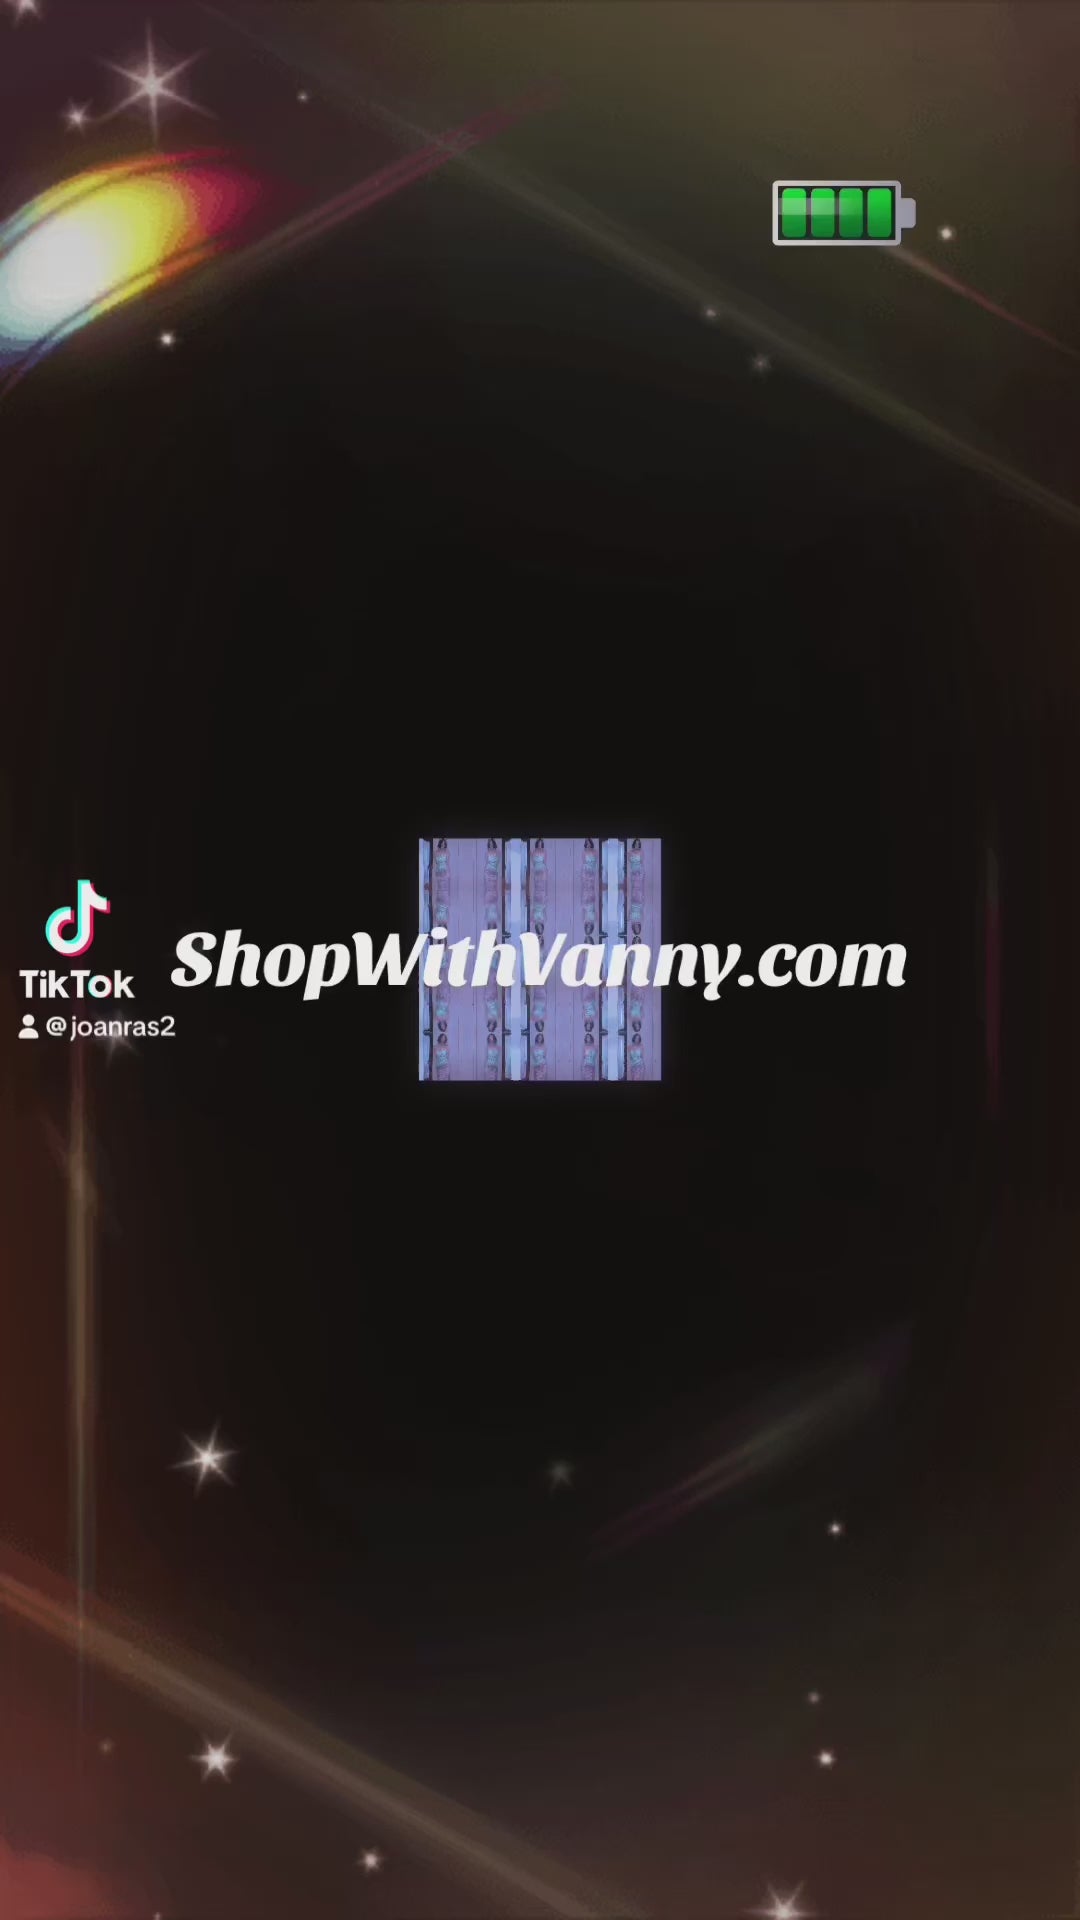 Load video: Be ready to Shop With Vanny